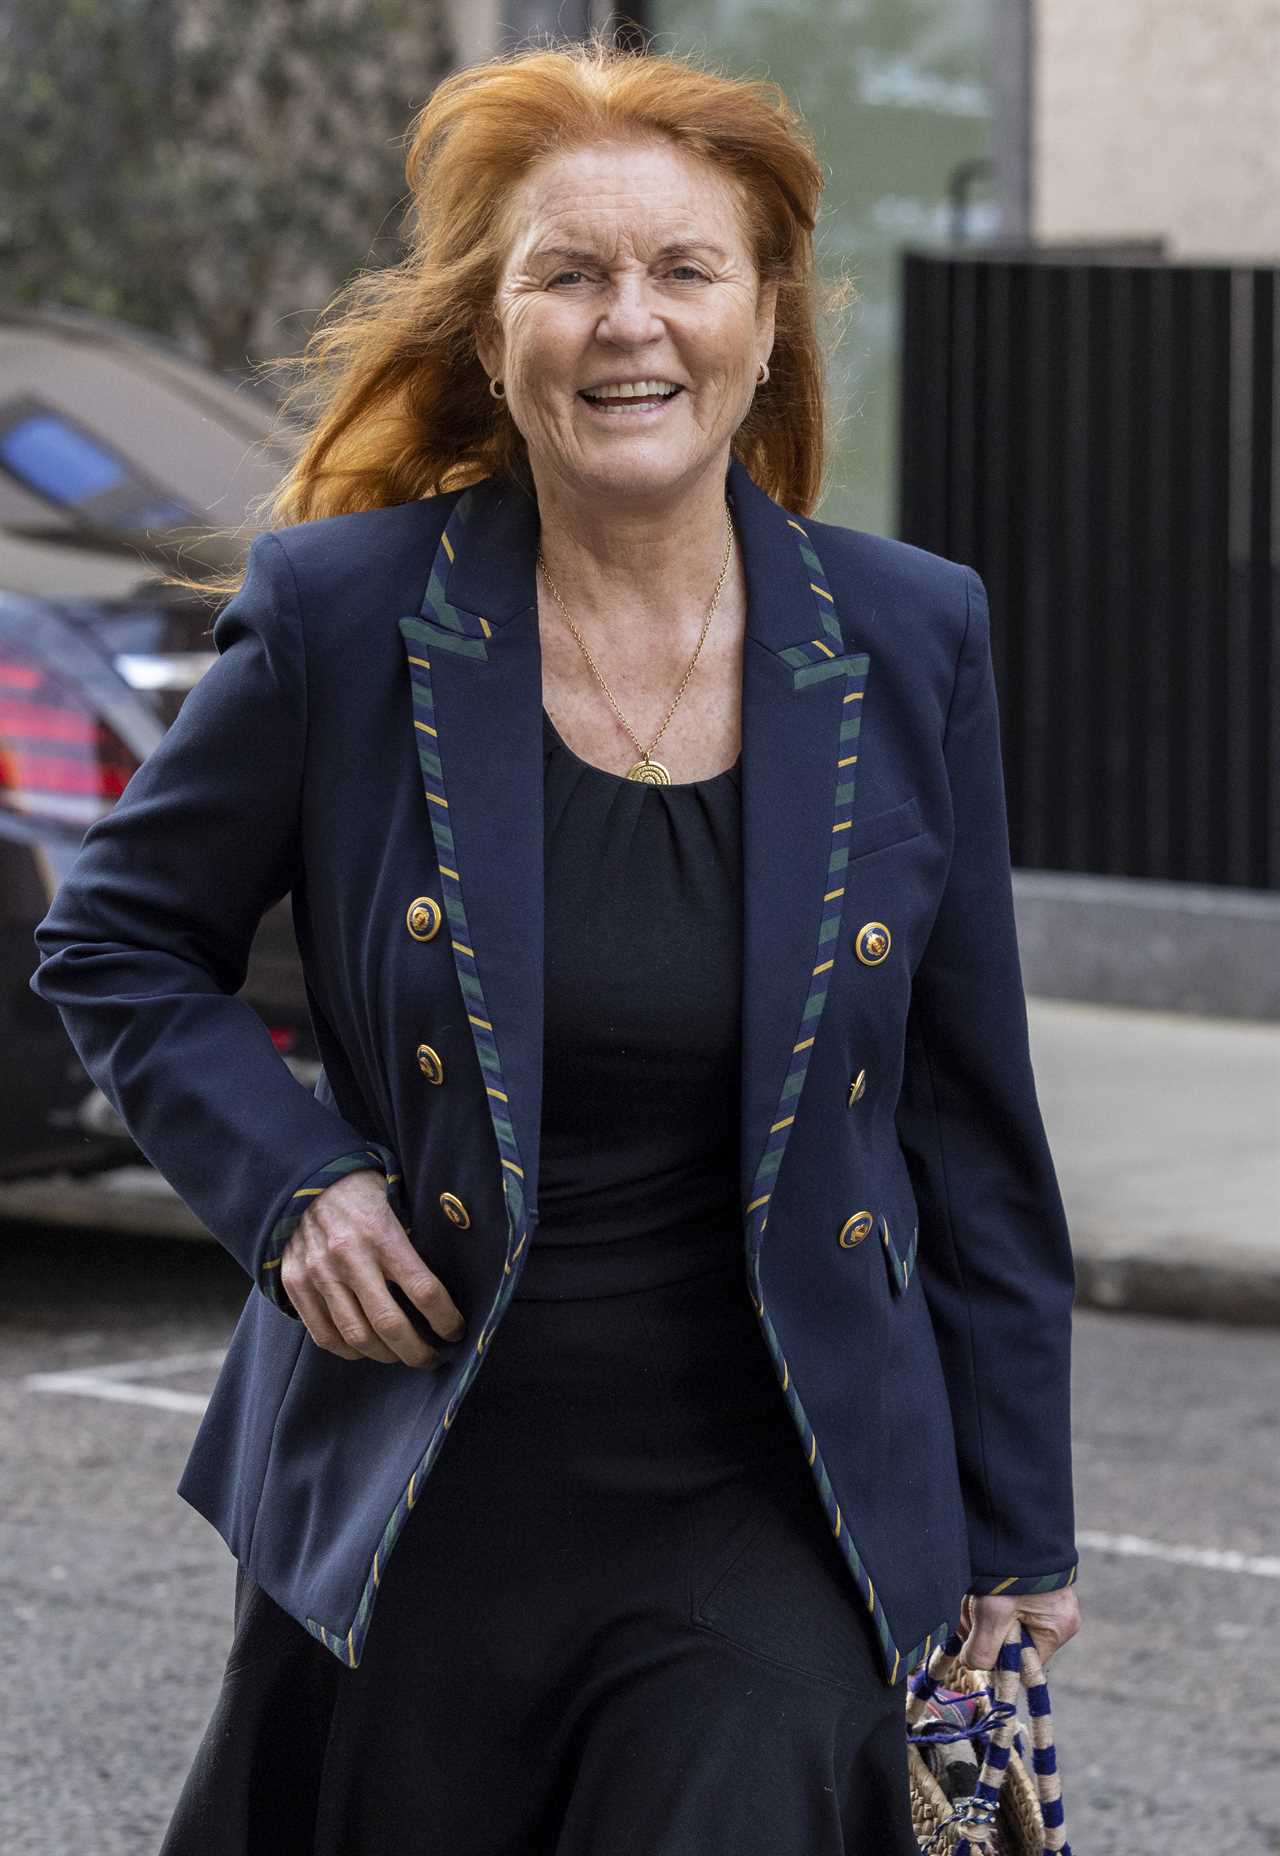 Sarah Ferguson leaves hospital with a smile after second cancer diagnosis